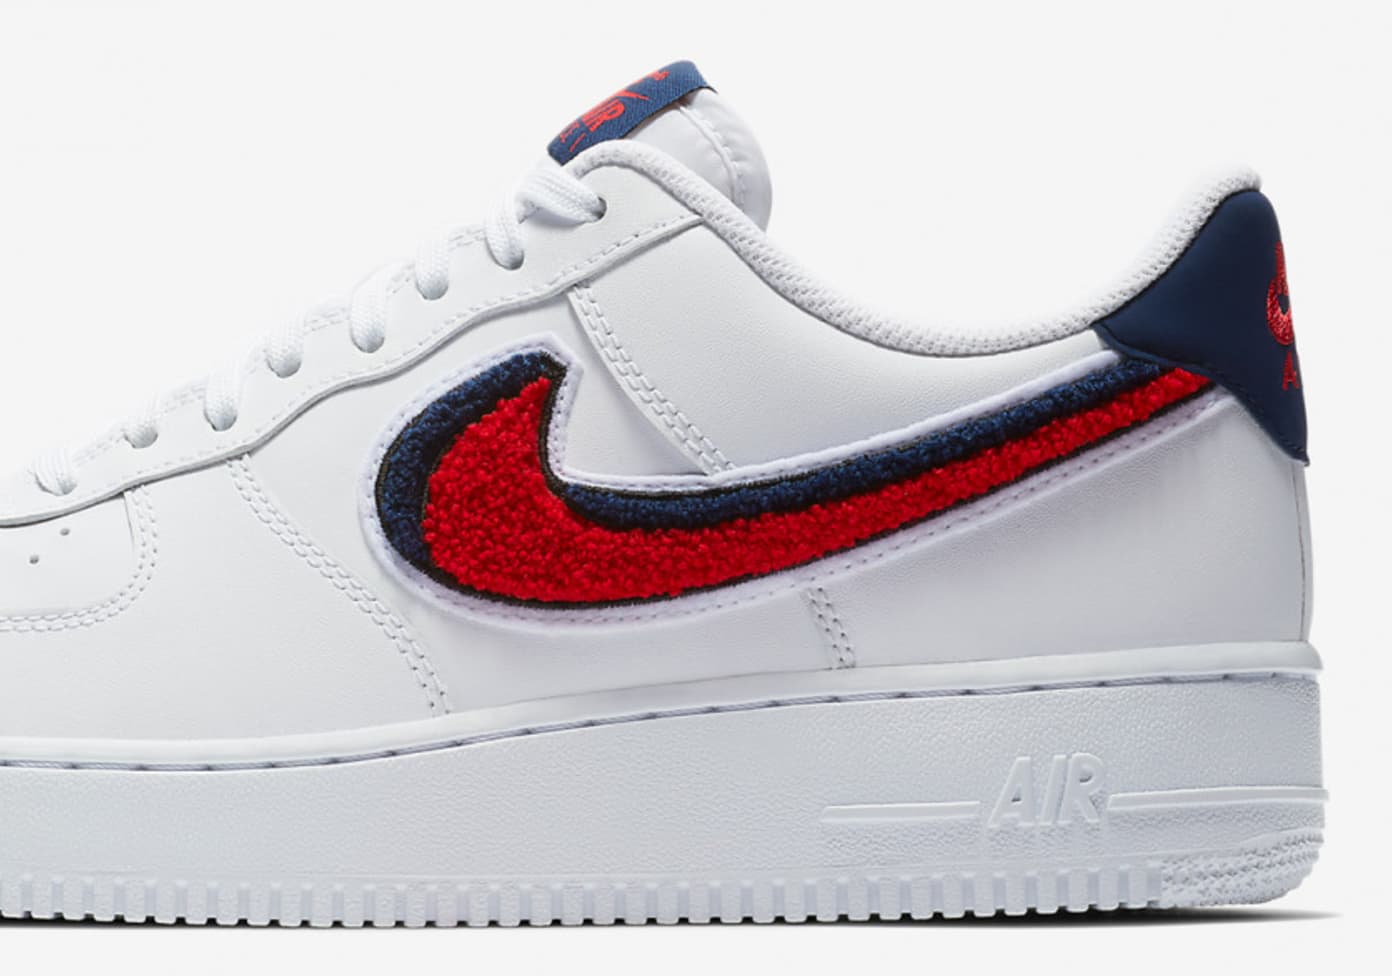 Nike Air Force 1 07 LV8 “Chenille Swoosh”